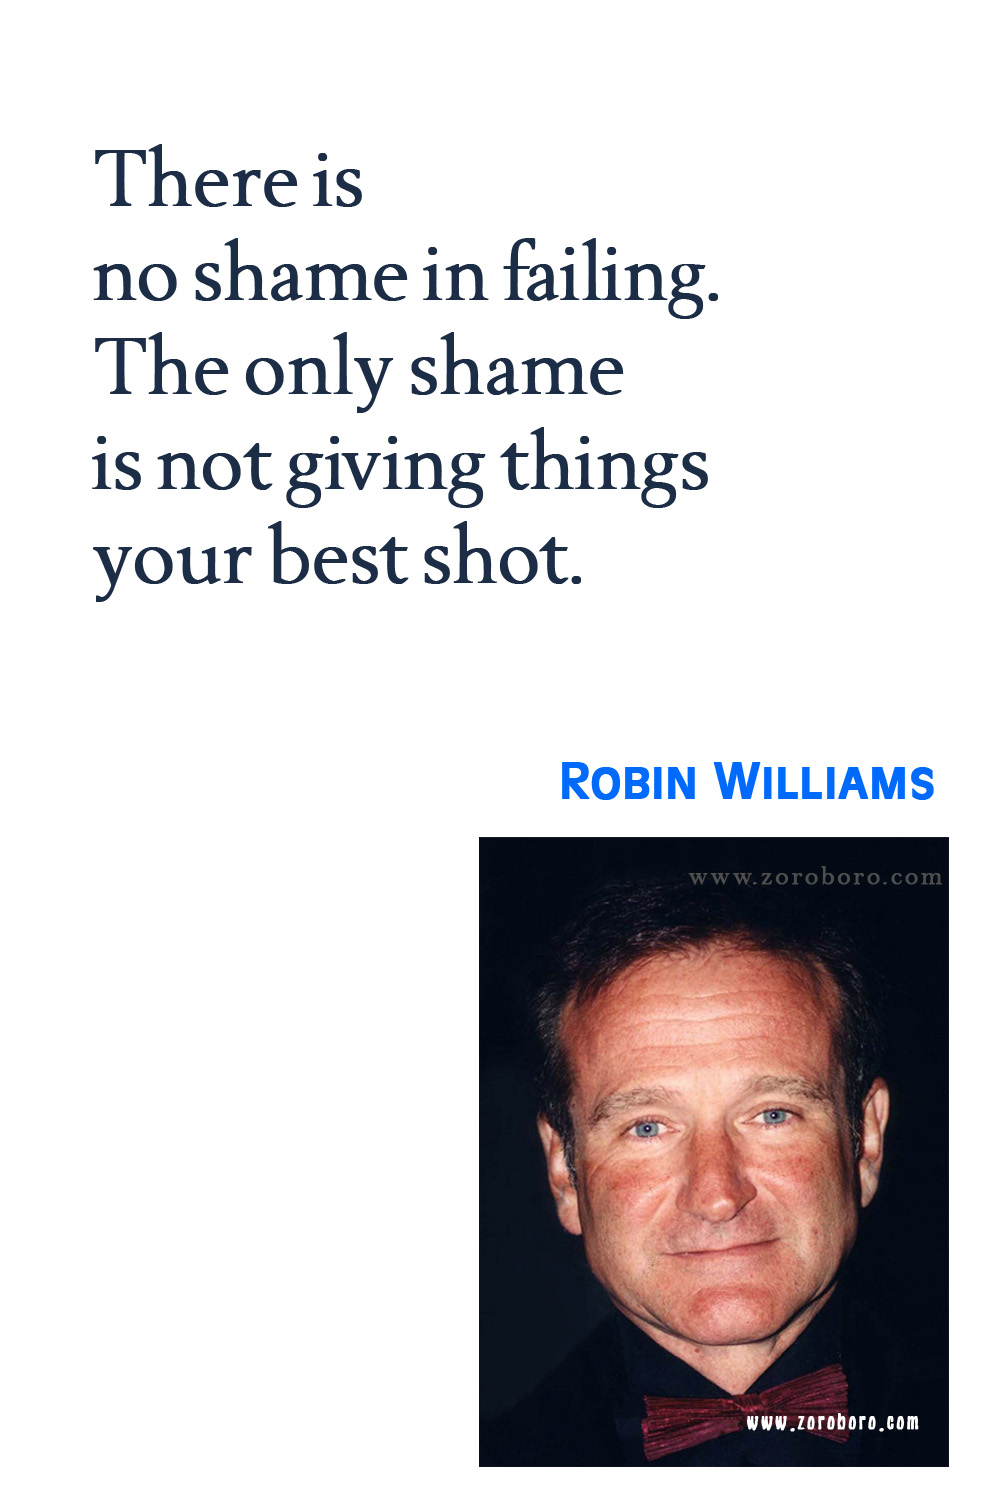 Robin Williams Quotes, Robin Williams Funny Quotes, Robin Williams Movies Quotes, Robin Williams Quotes on Comedy, Life, Love, and Happiness. Robin Williams Quotes.